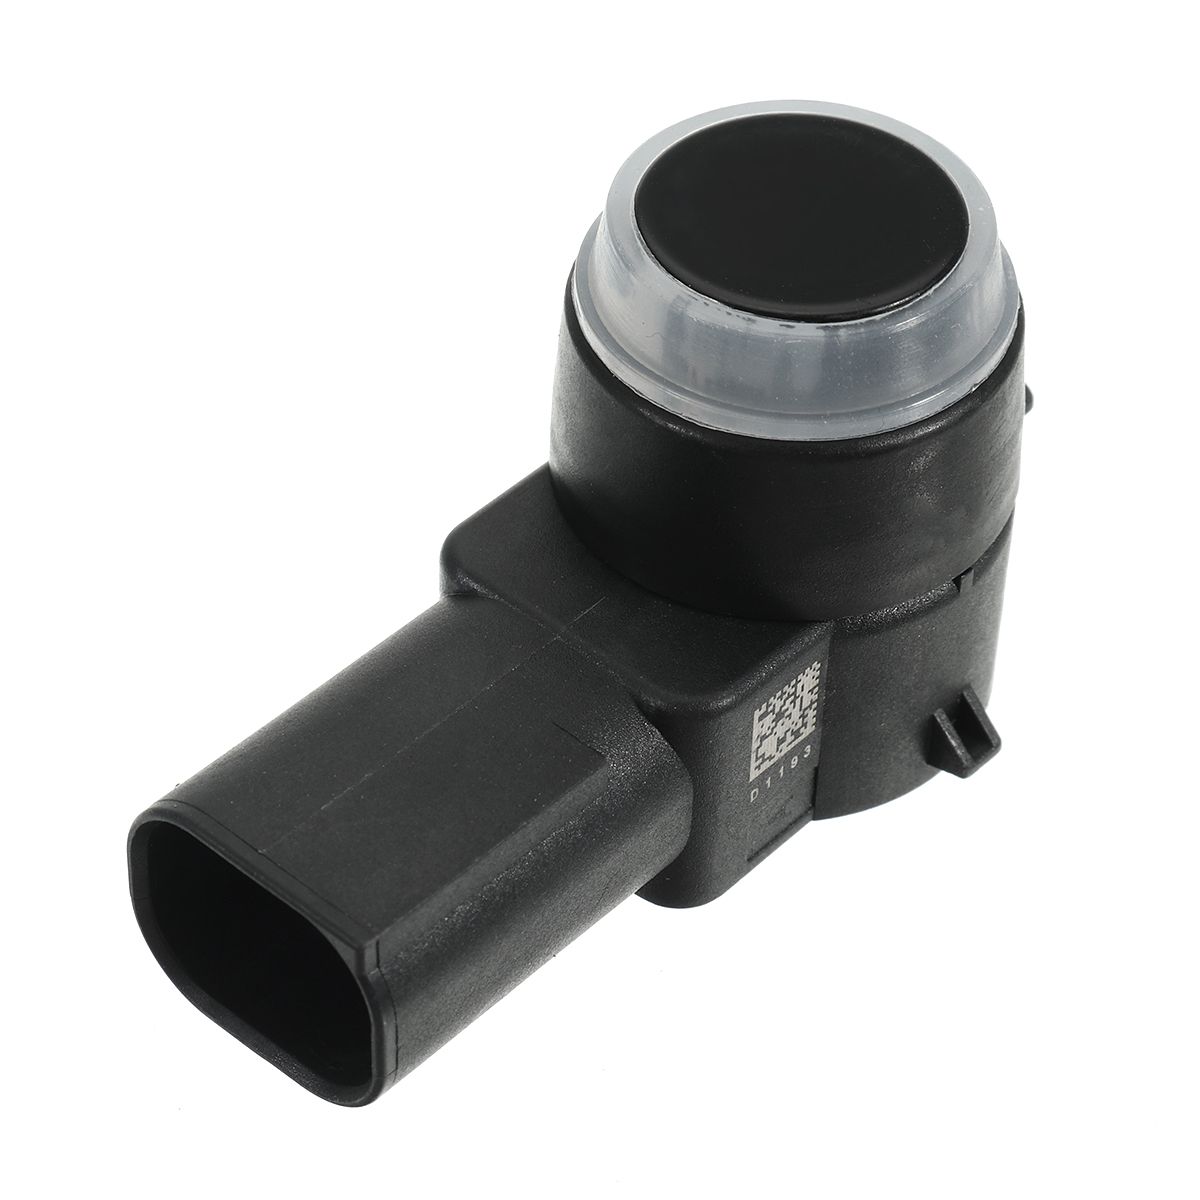 Classic-Black-Parking-Sensor-PDC-For-GMC-GreatWall-Haval-H6-1405544